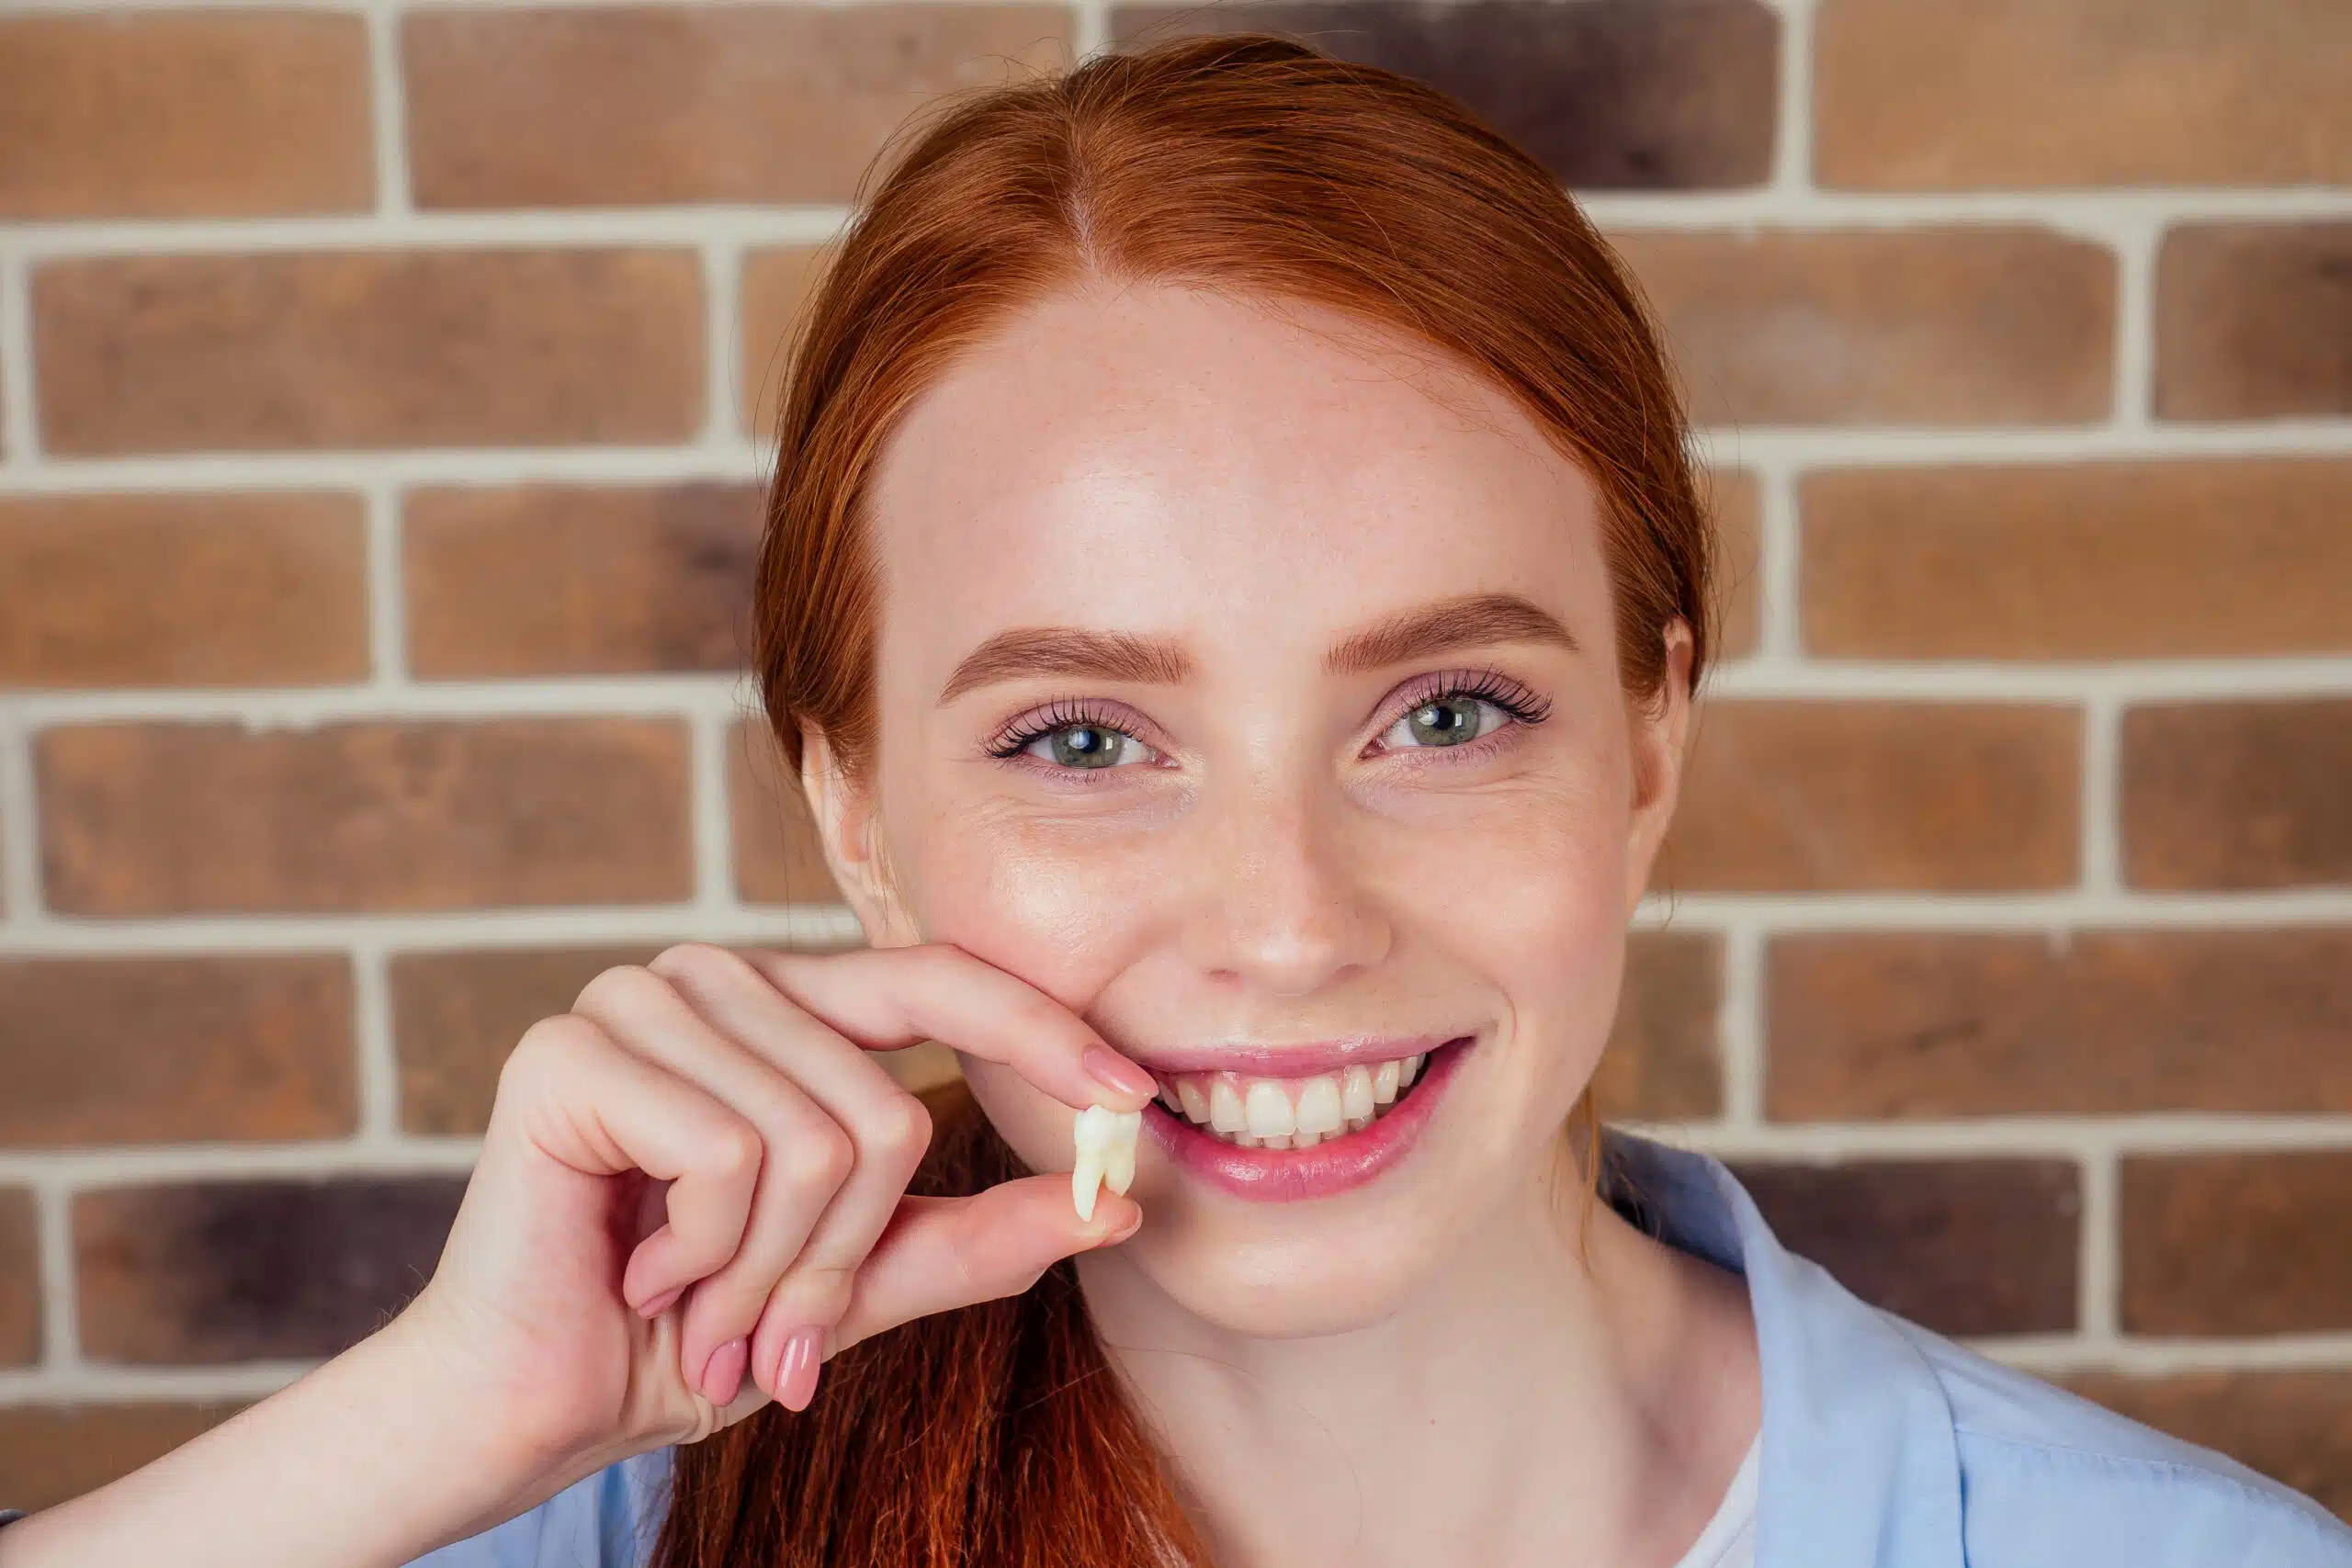 We offer a variety of tooth replacement options to restore your smile following tooth loss.